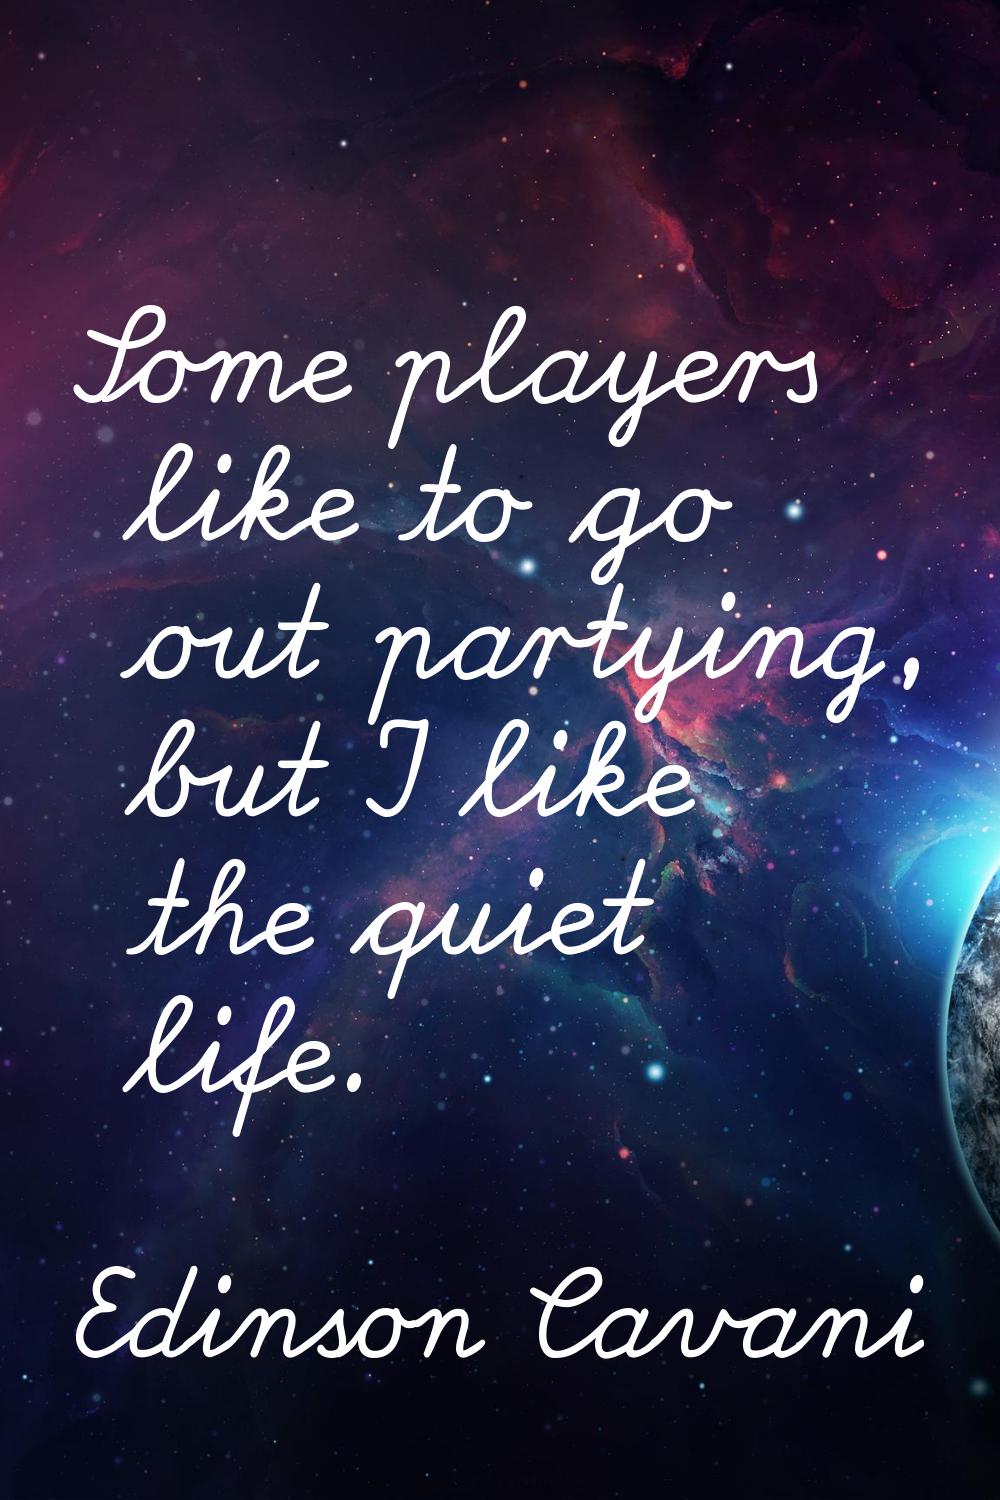 Some players like to go out partying, but I like the quiet life.